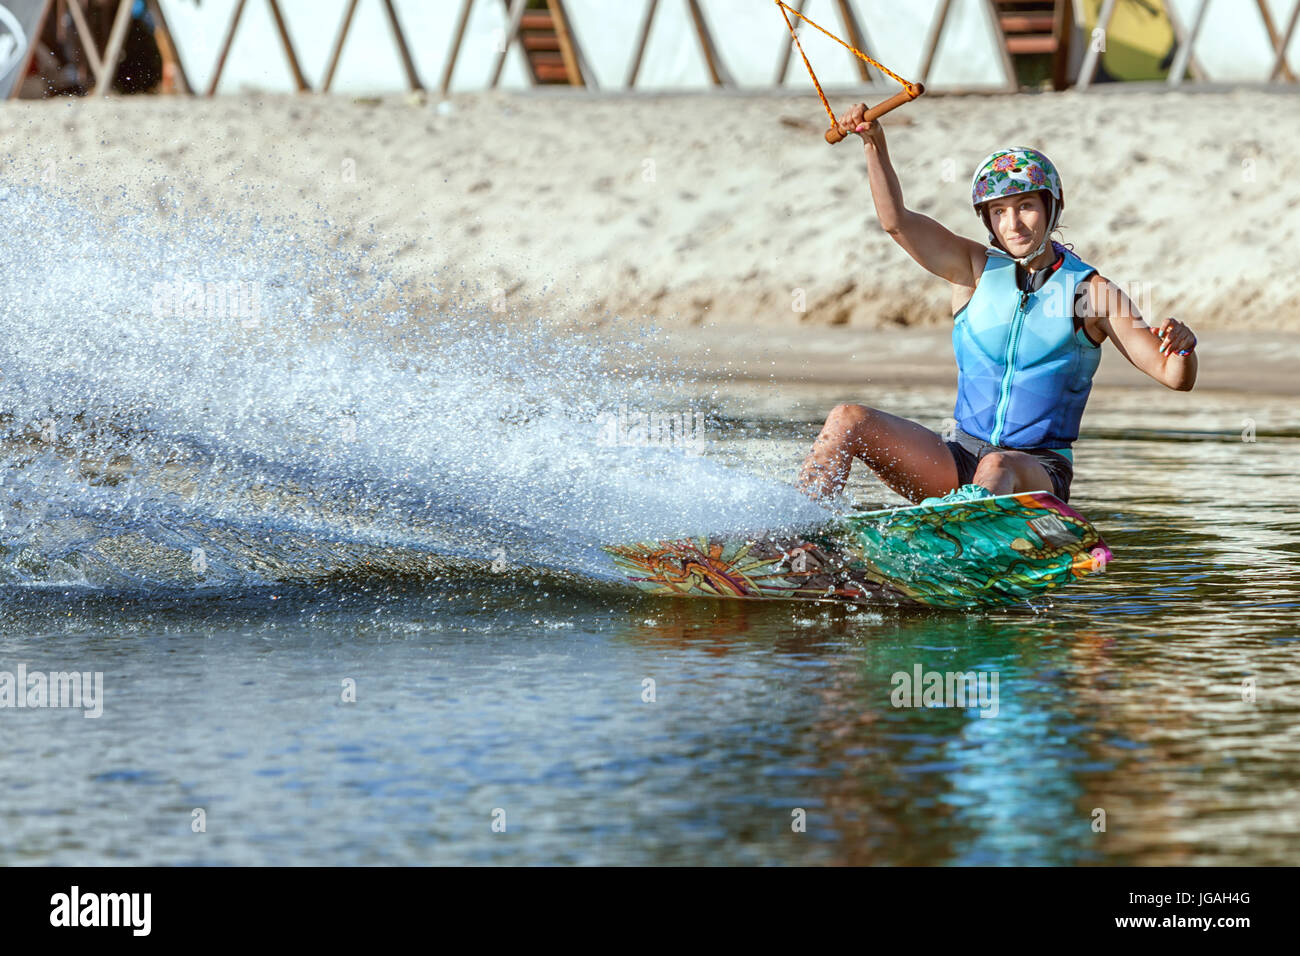 Woman is an extreme sportswoman on a wakeboard on the water. Stock Photo